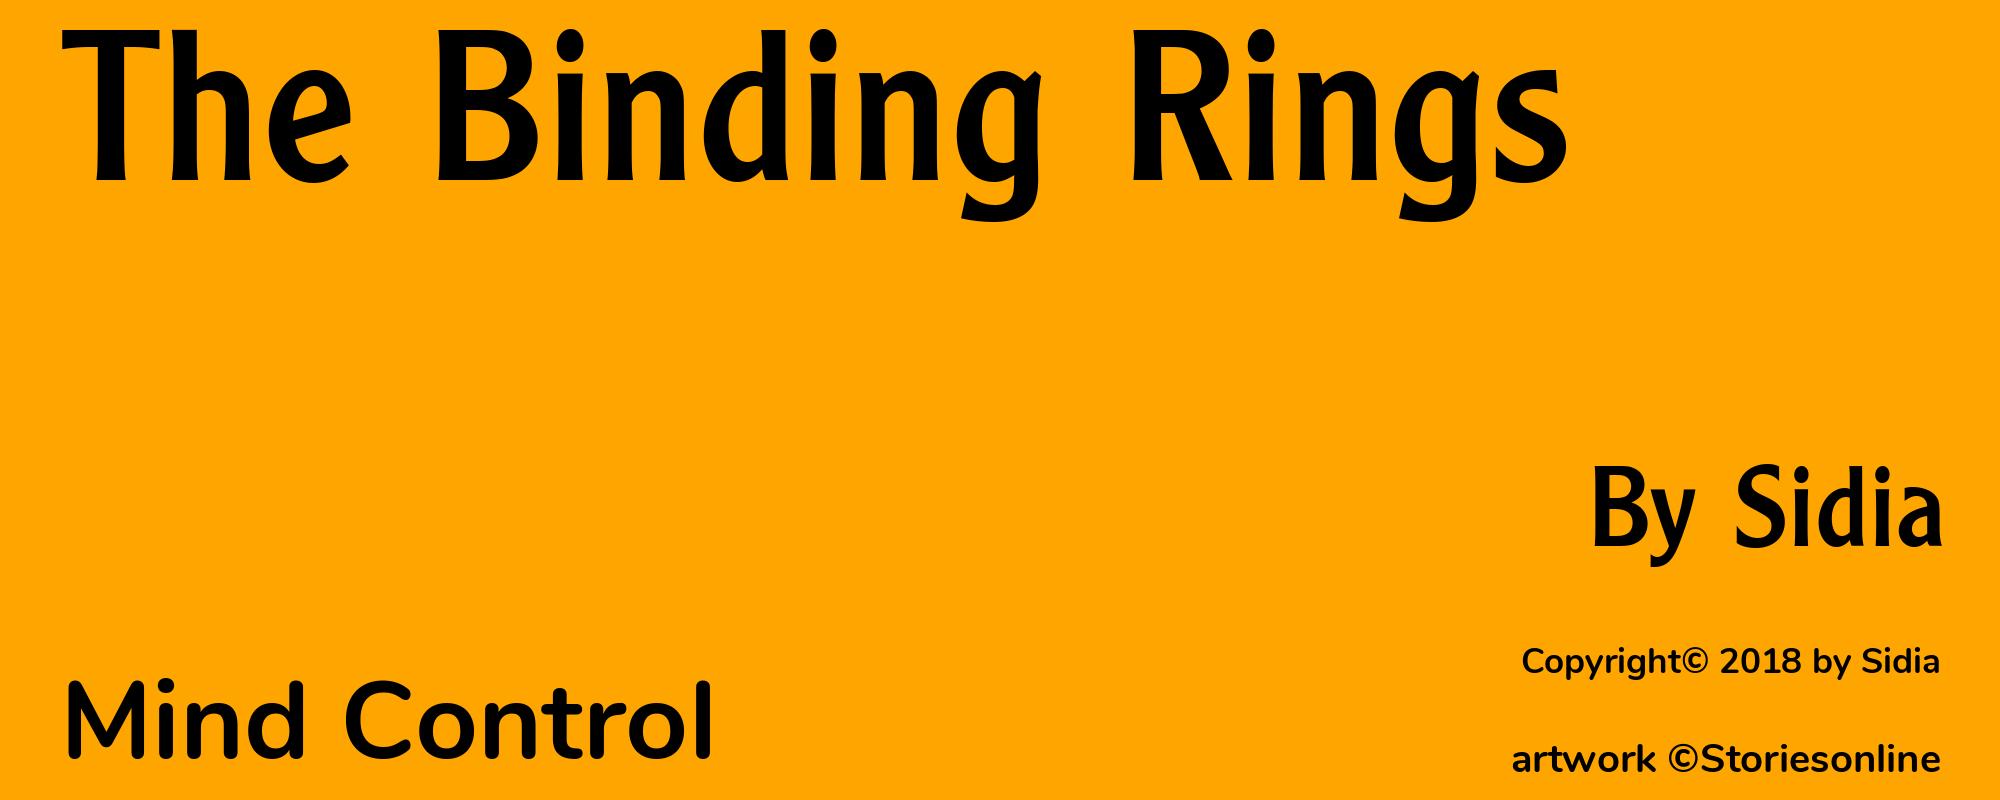 The Binding Rings - Cover